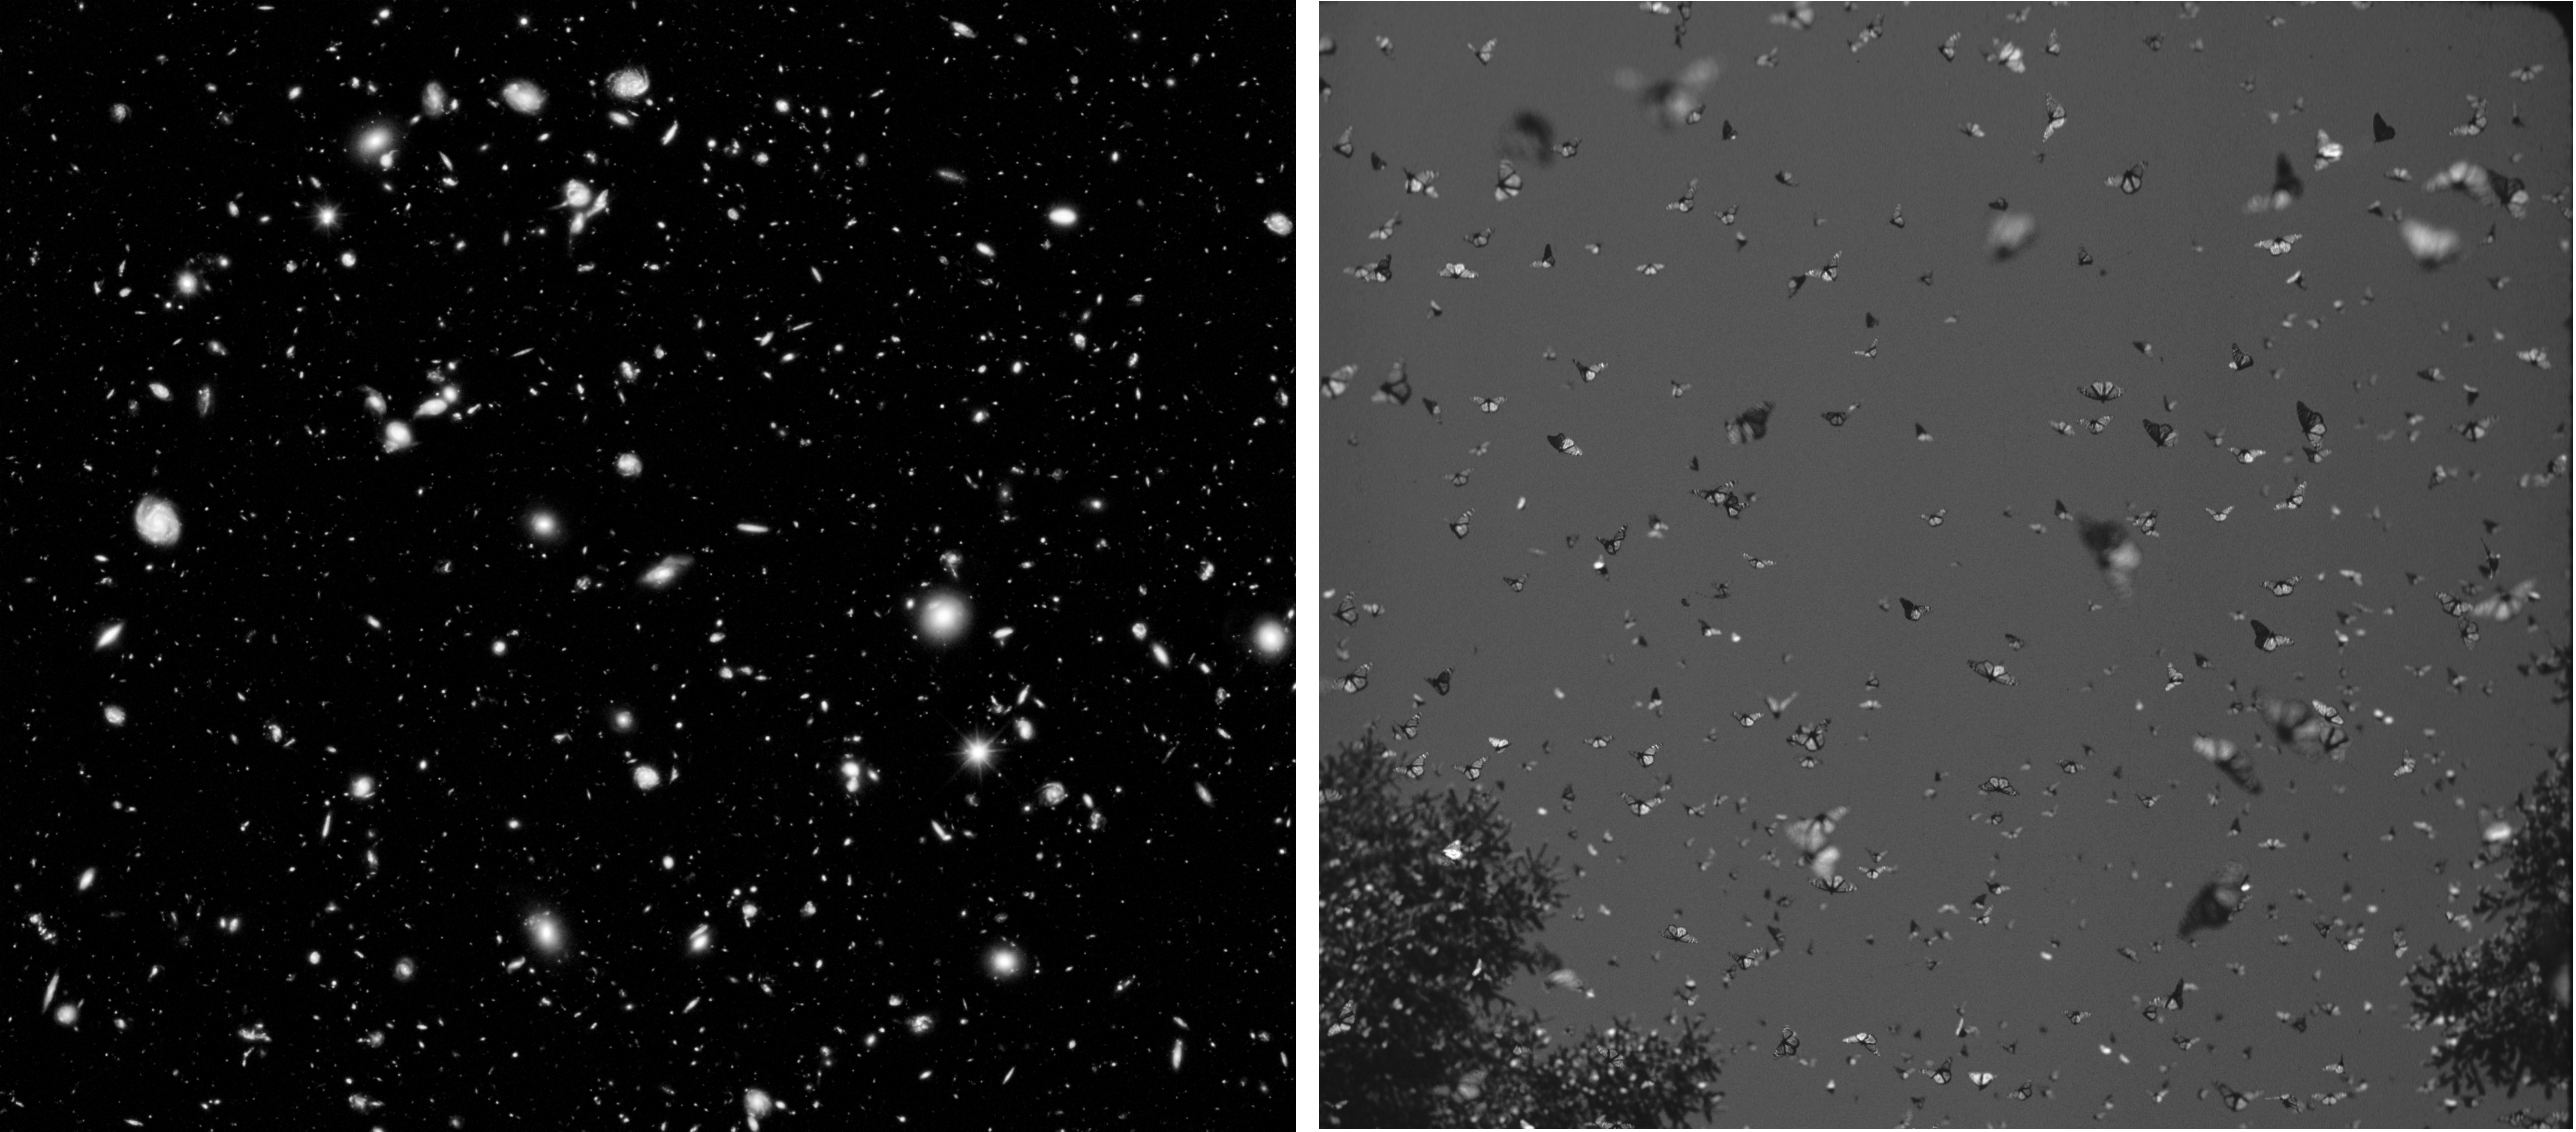 Figure 4.3: Hubble Telescope, Visible and Near Infra-red Light Spectrum of the universe © 2012 NASA (public domain); "Kaleidoscope of Monarch Butterflies" (© 2016 Dr. Lincoln Brower, Used with Permission)